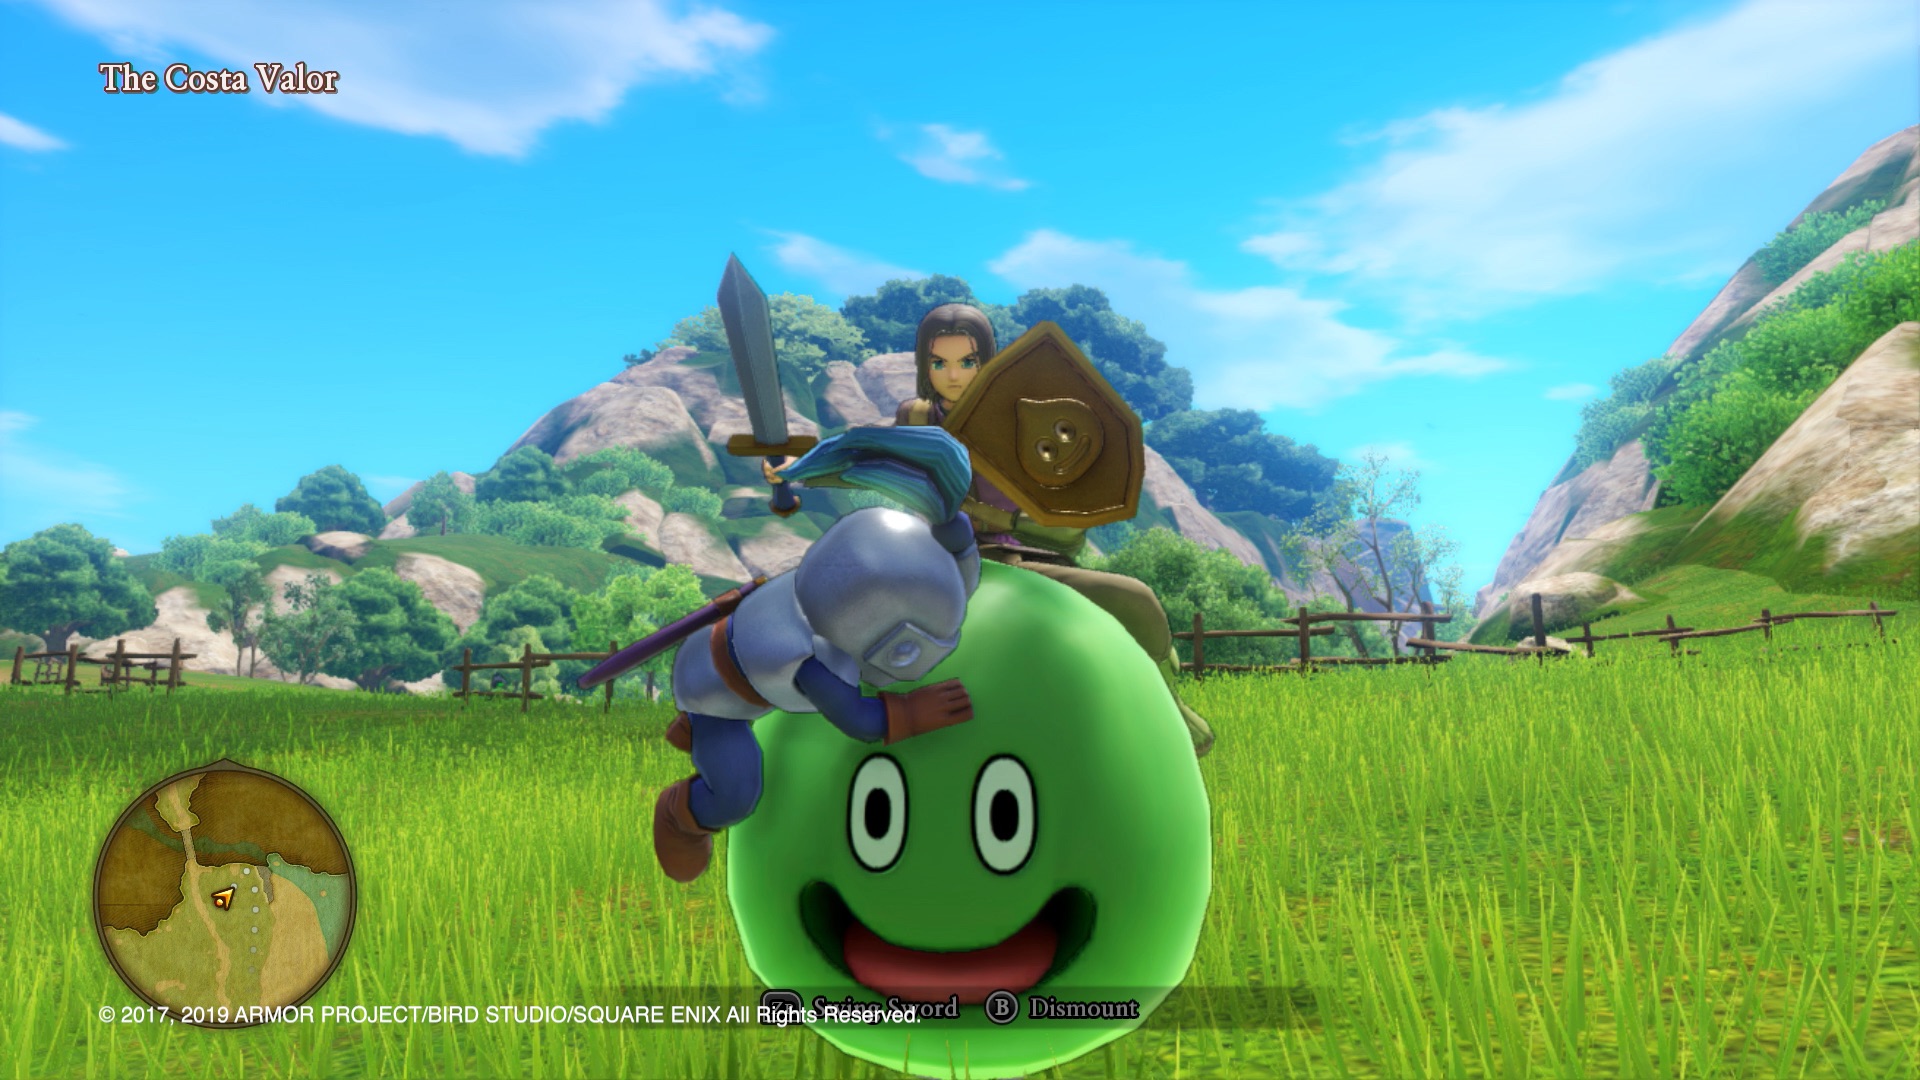 Dragon Quest XI S: Echoes of an Elusive Age Definitive Edition E3 2019 Screenshot 4